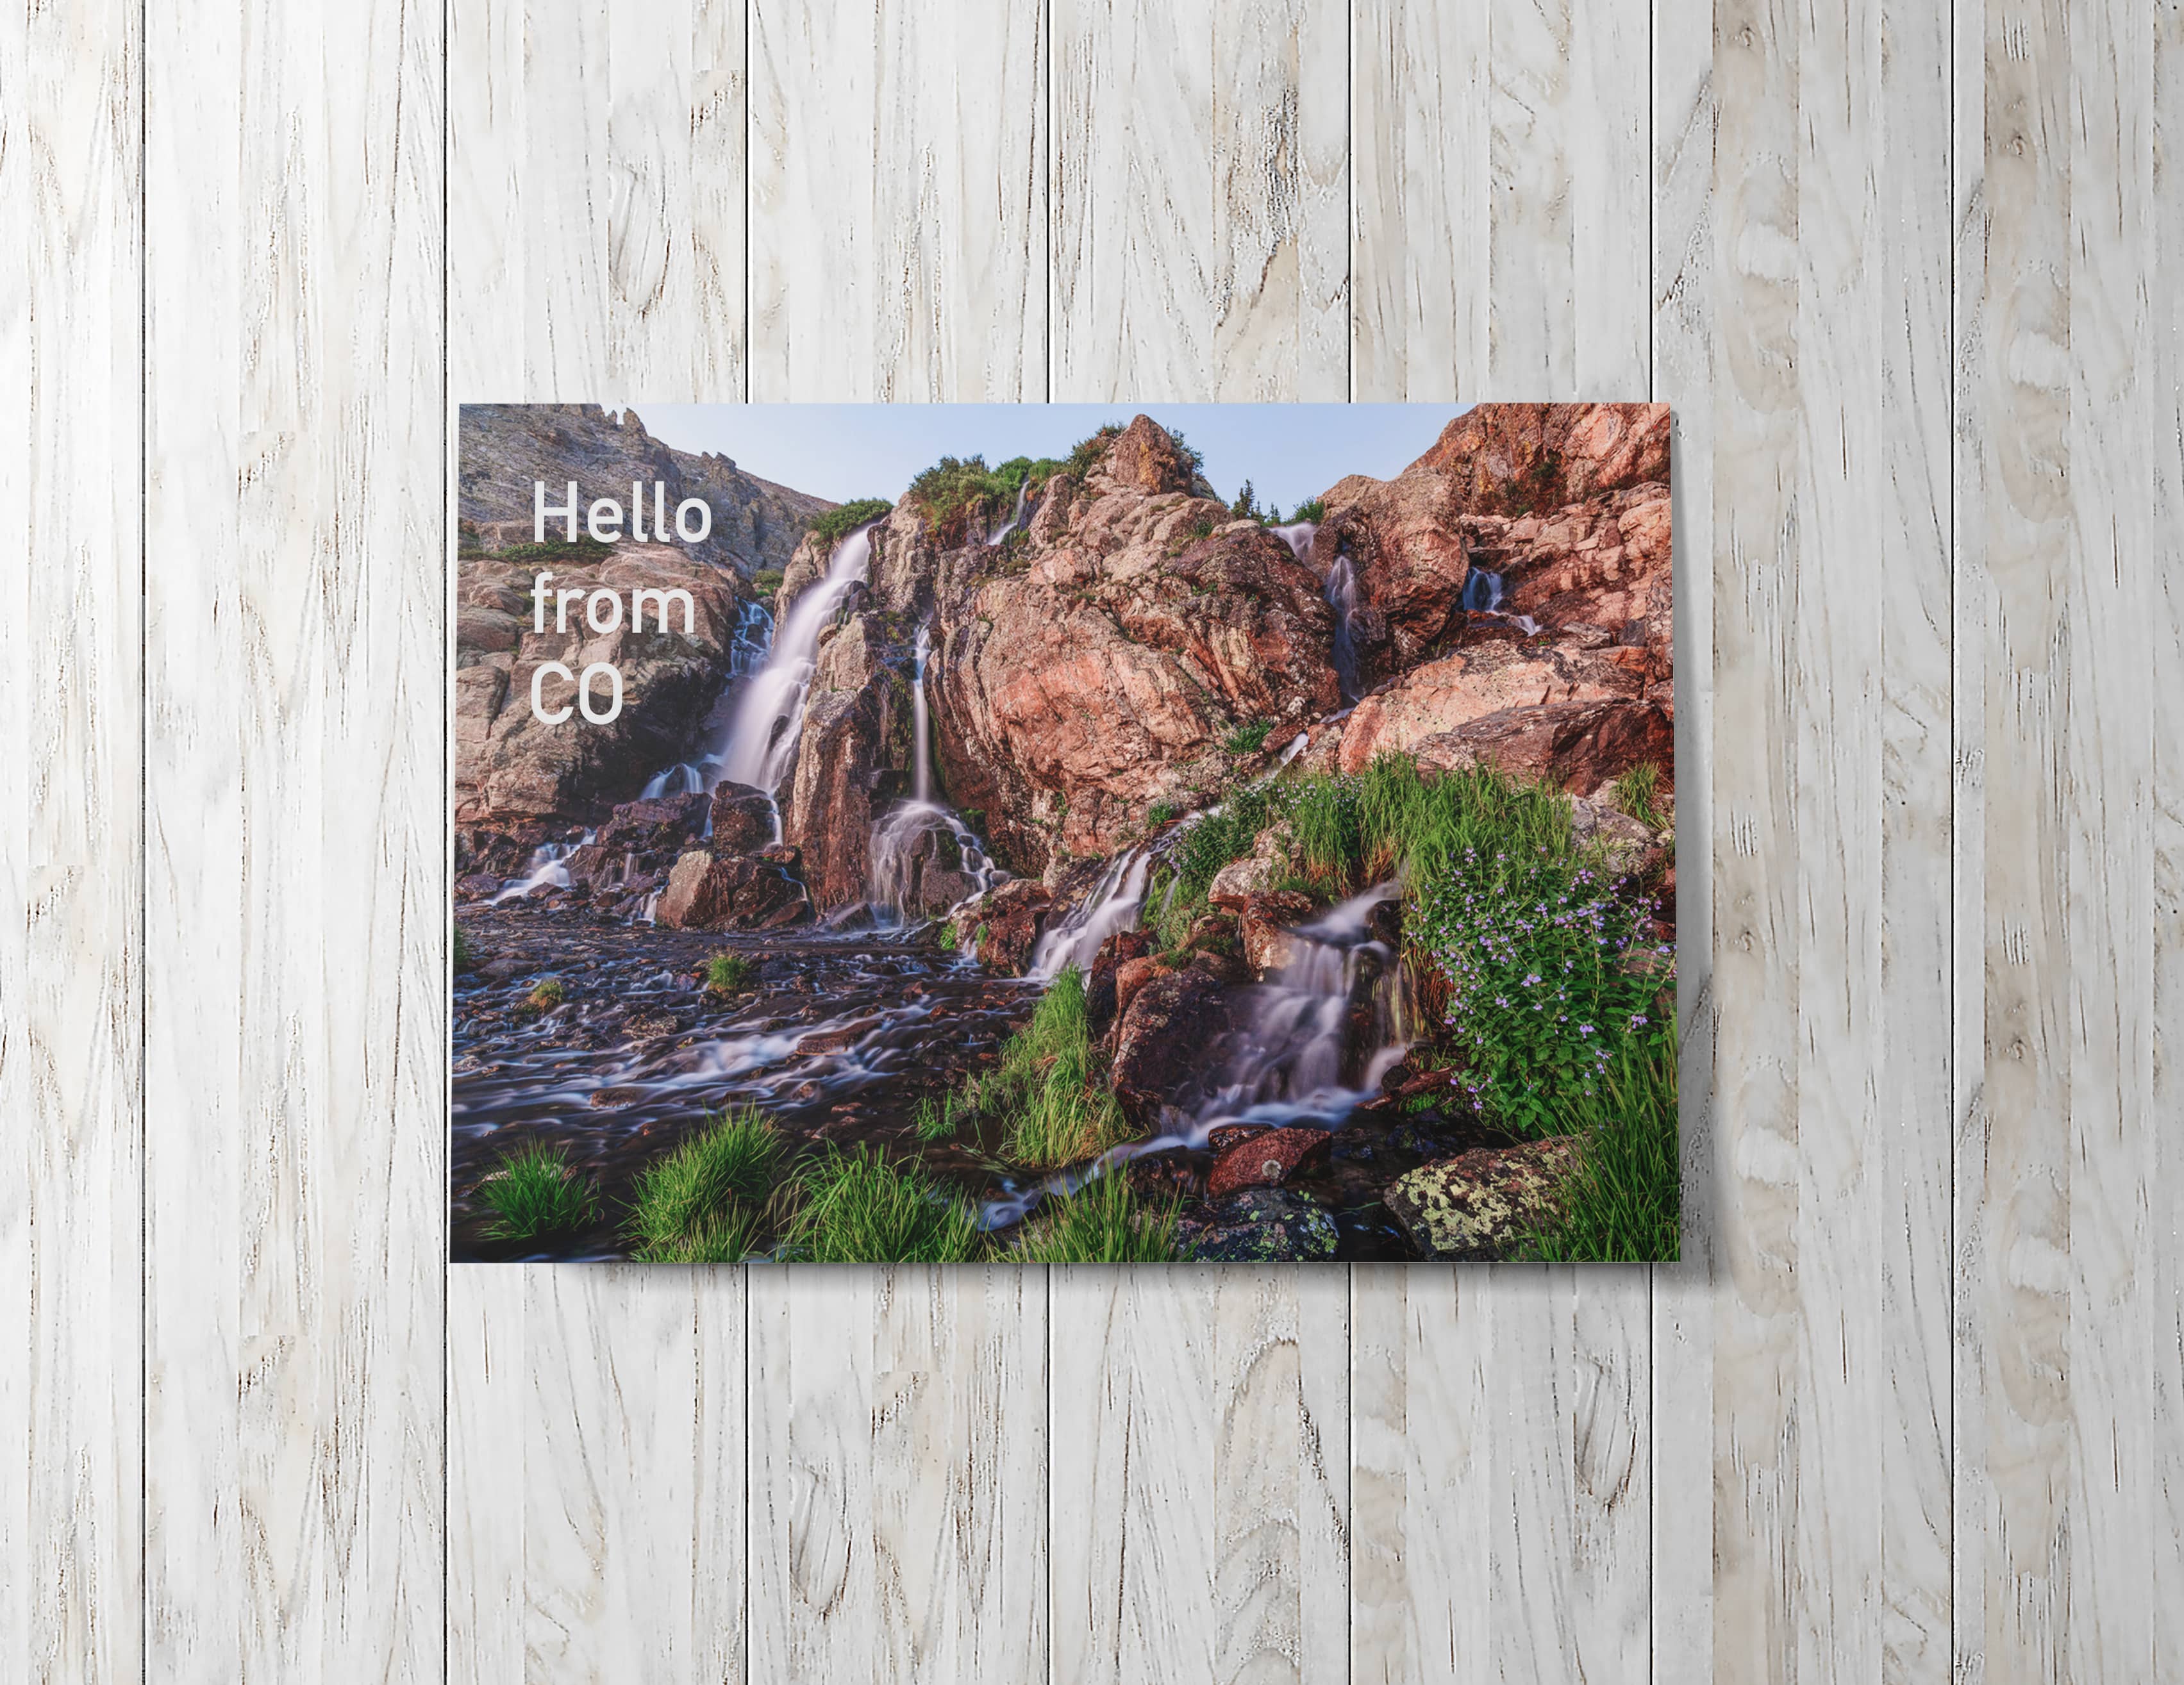 Turn your summer photography into a cutom photo card